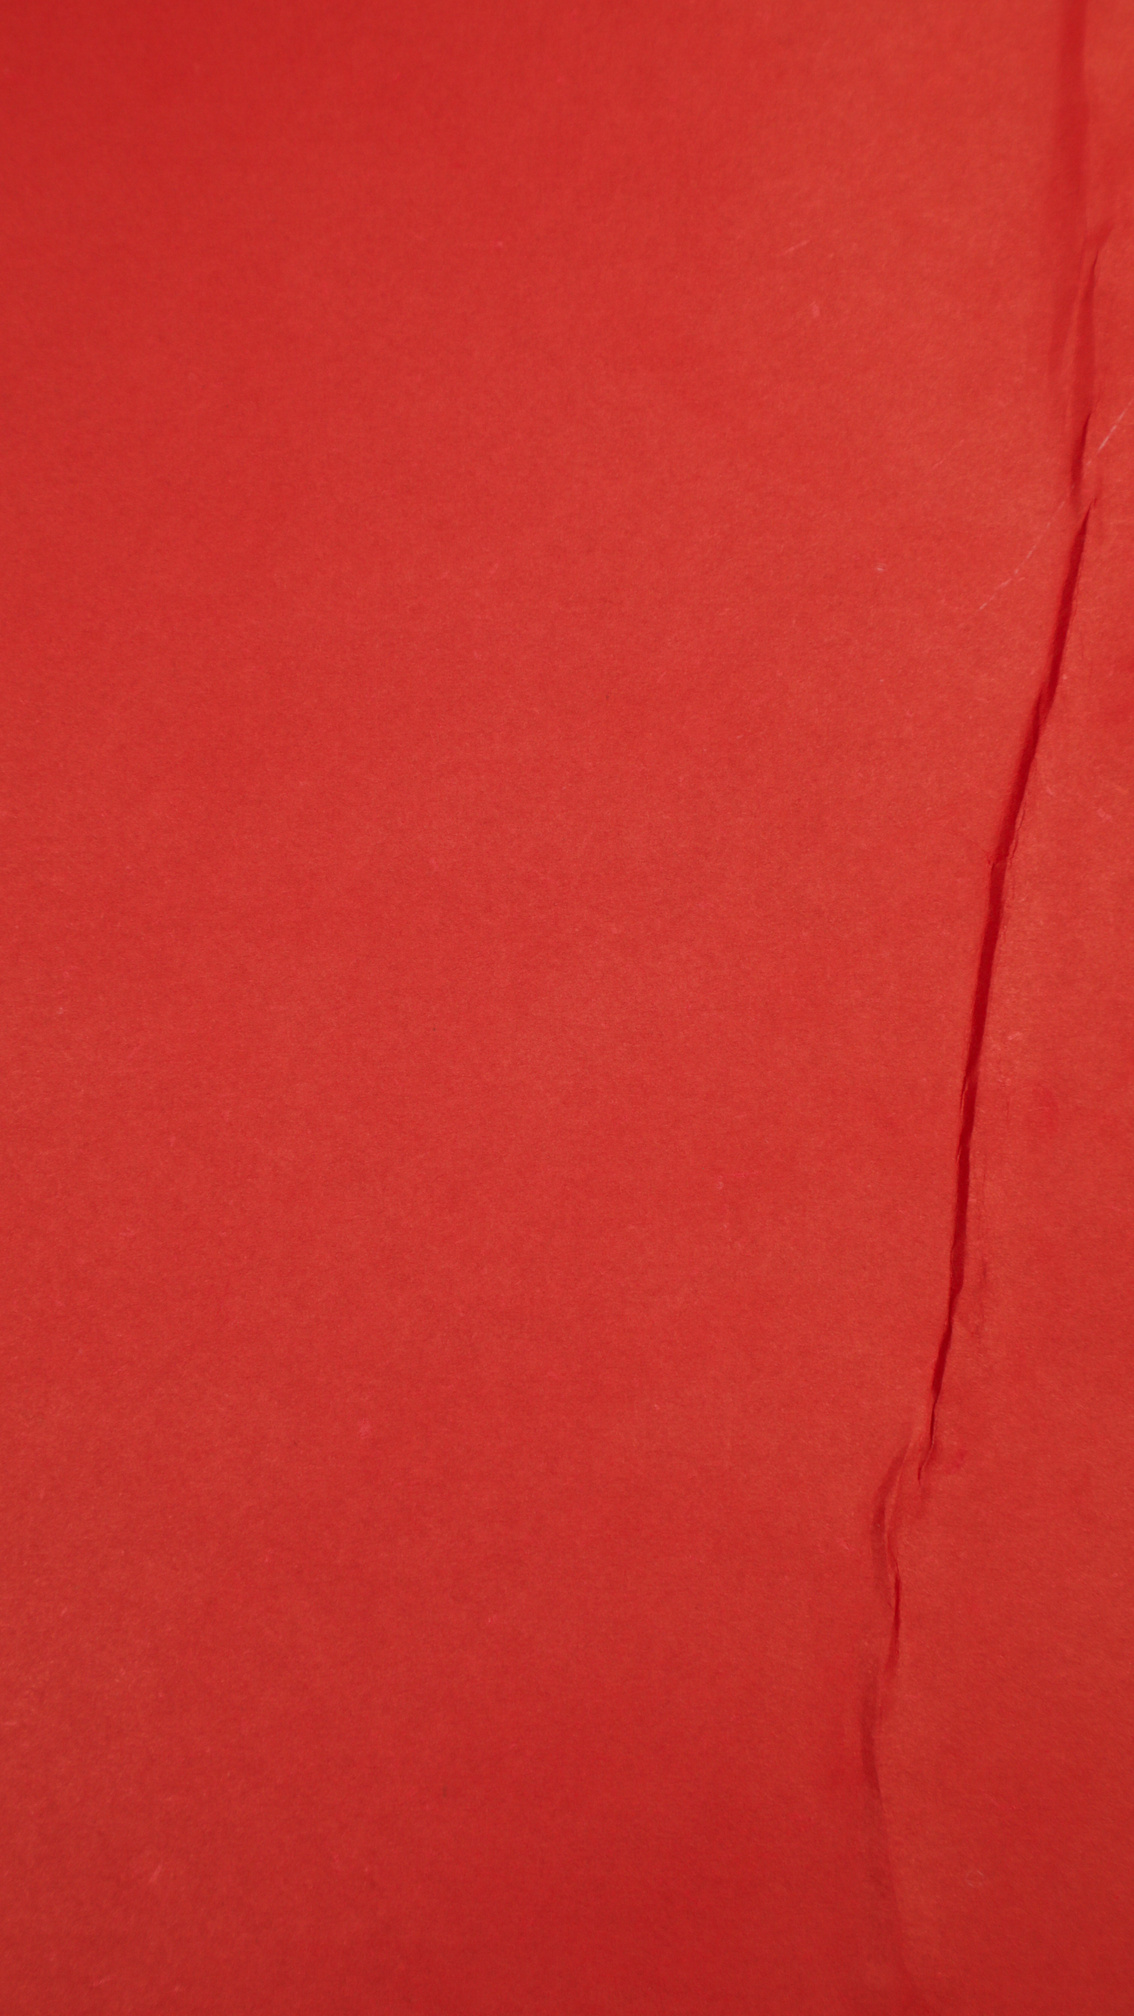 Red Paper Texture